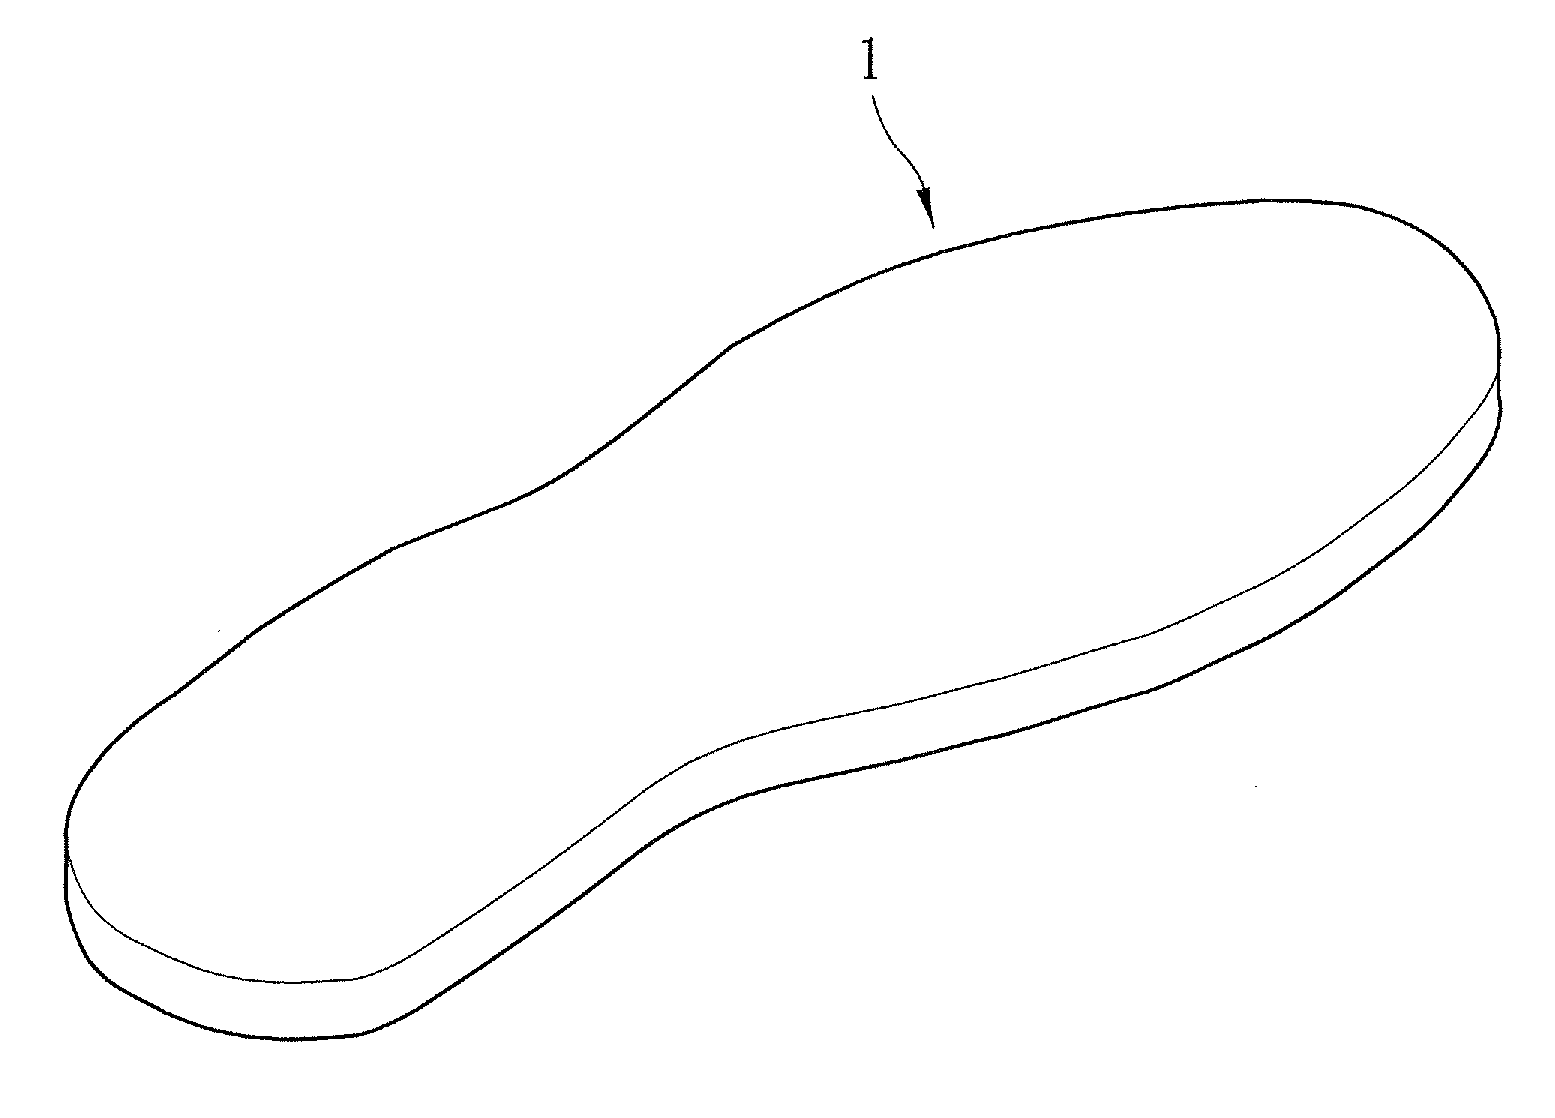 Structure of shoe sole